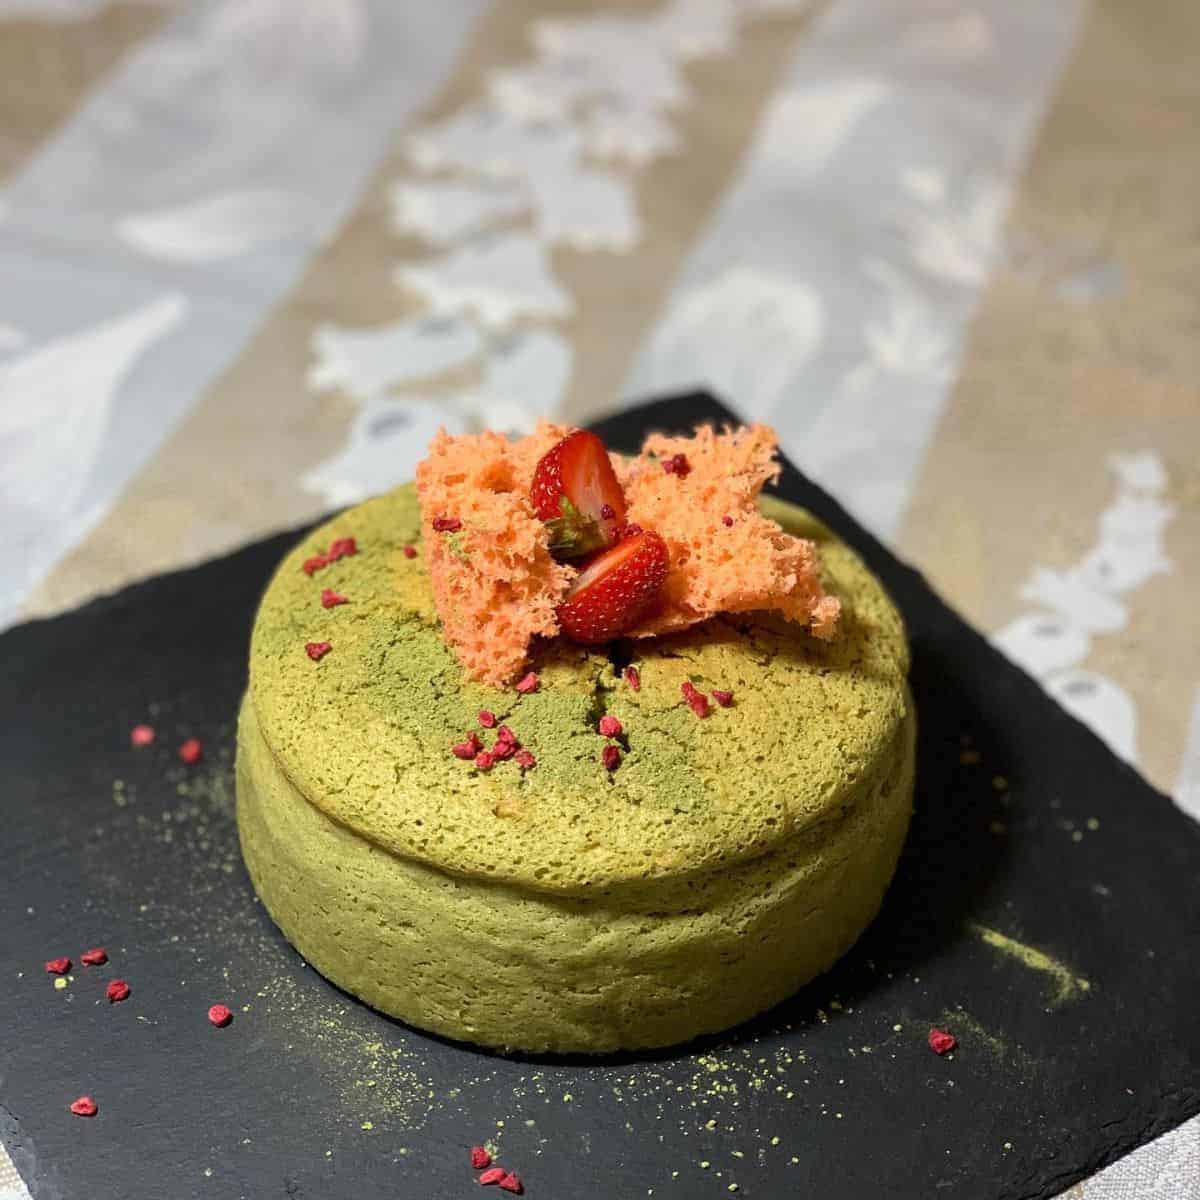 A small serving of matcha cheesecake with pink garnishes